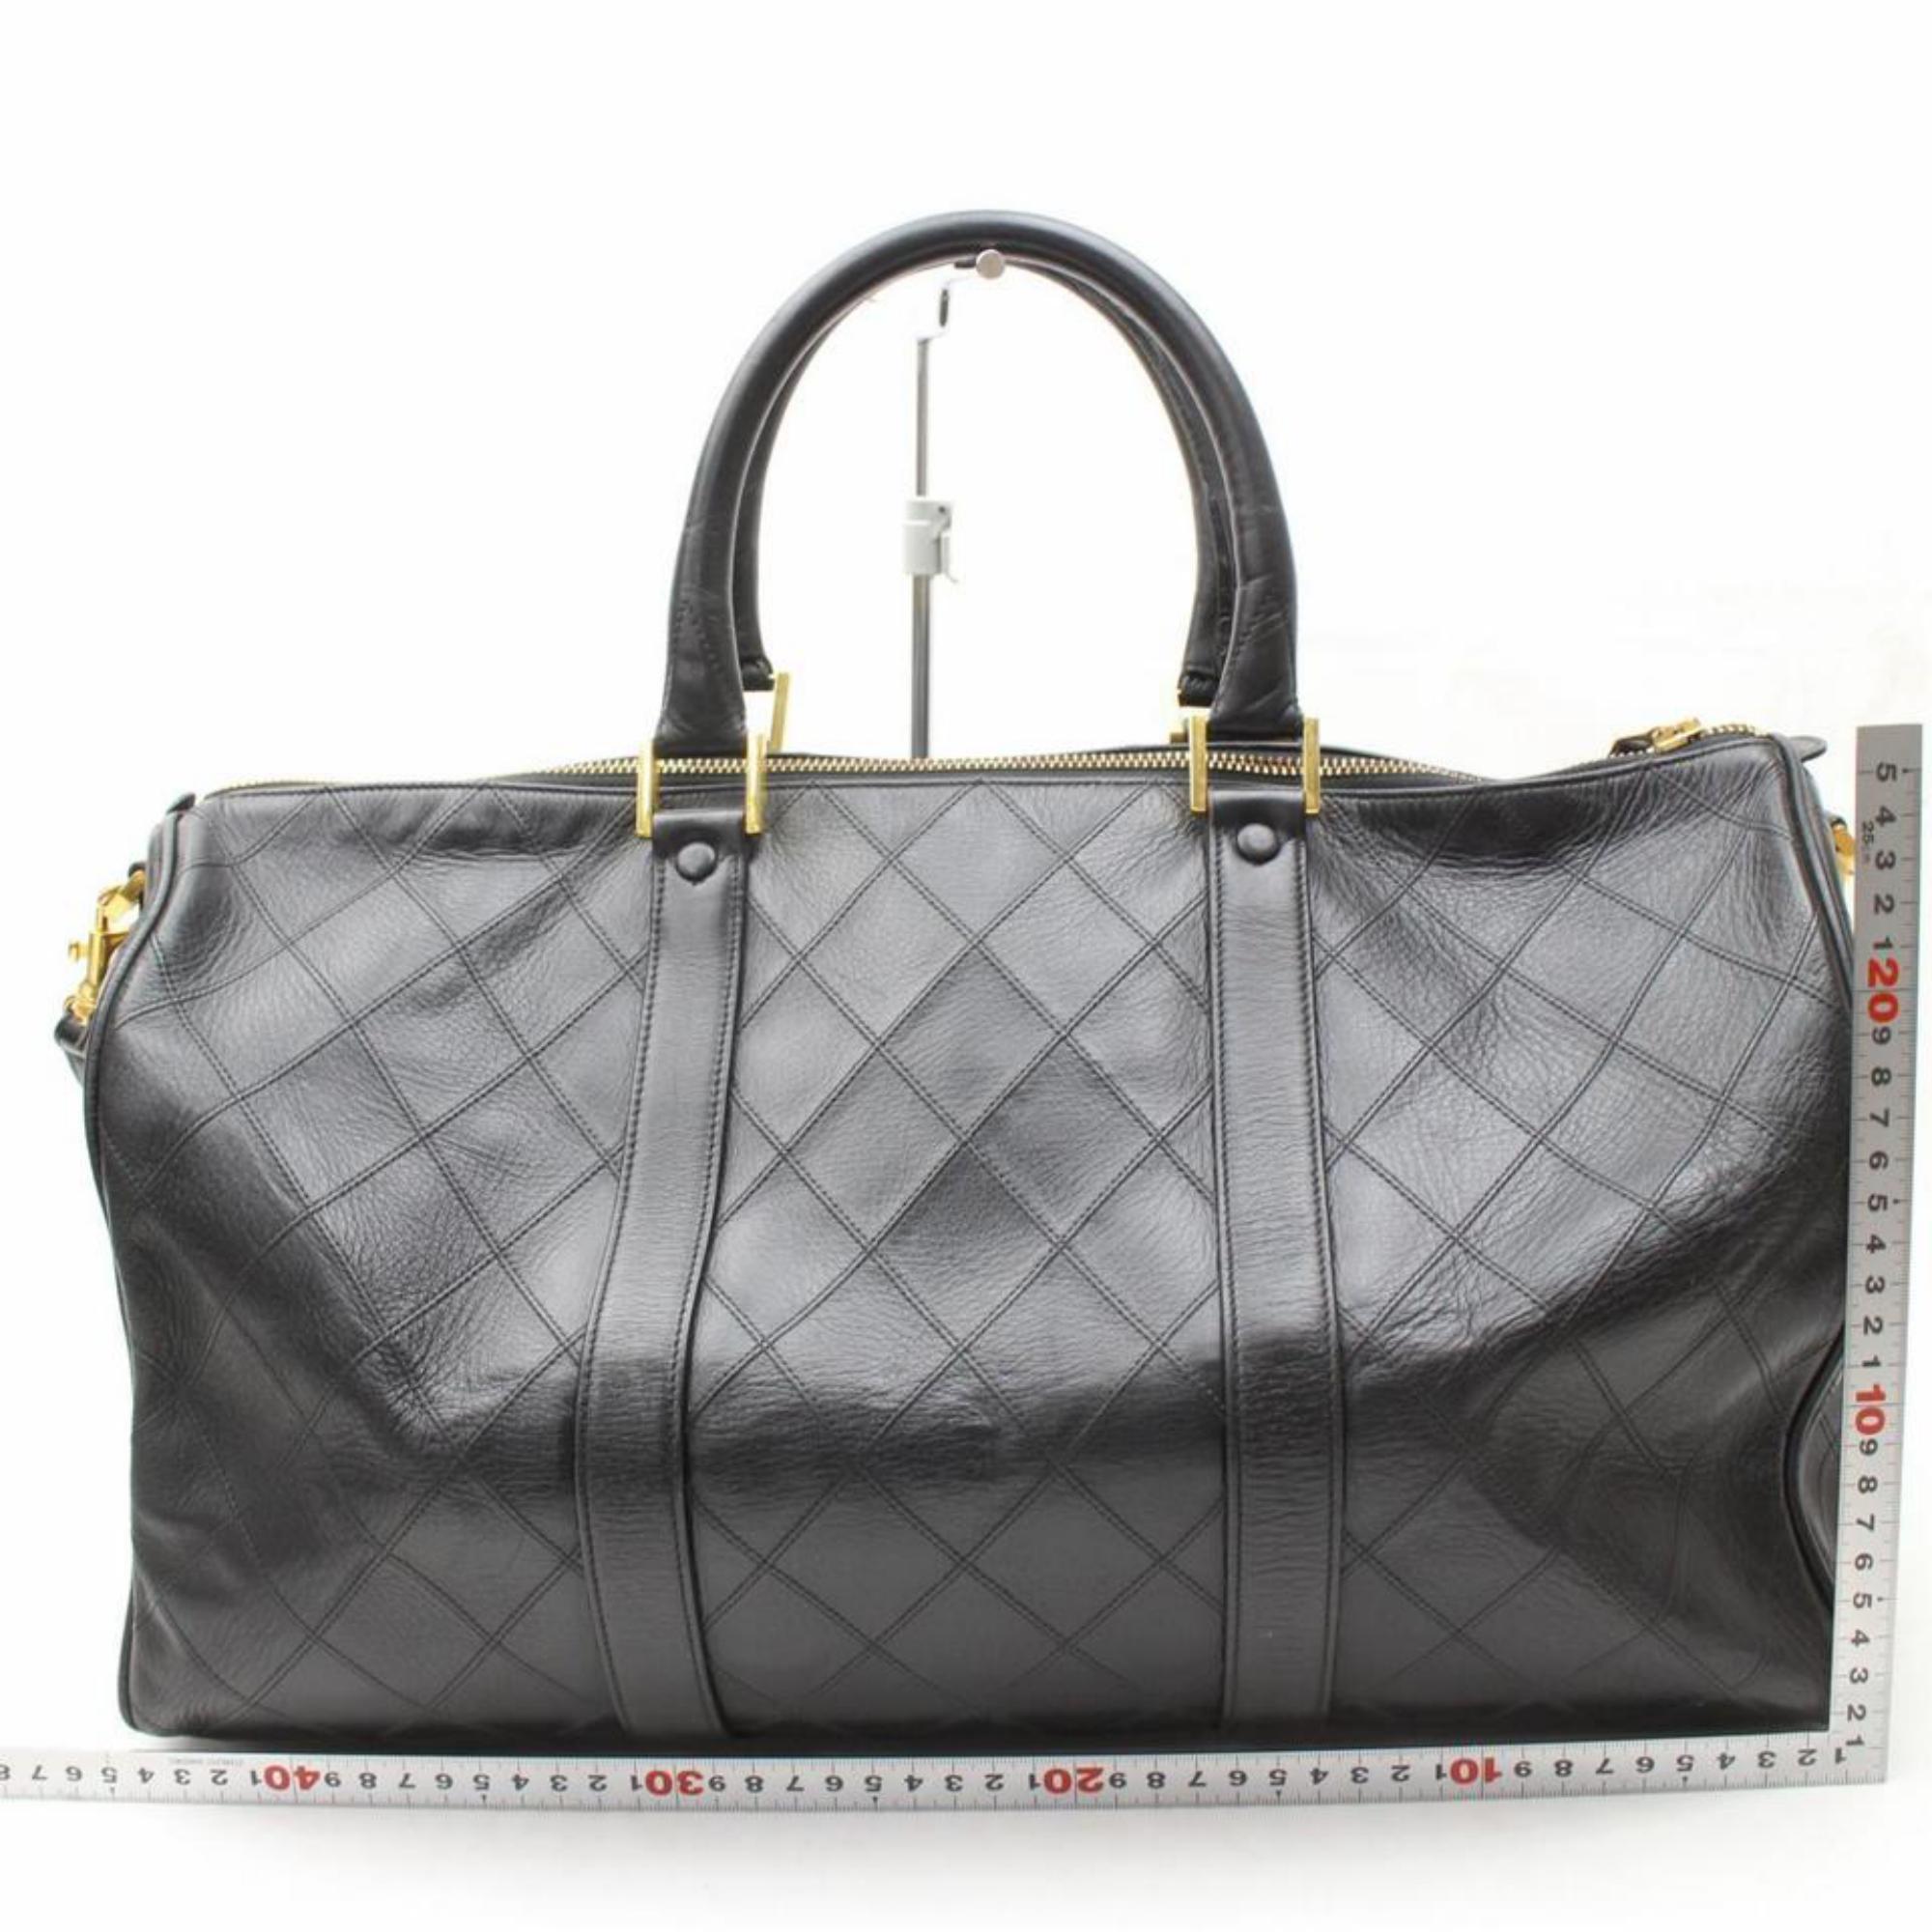 Chanel Quilted Boston Duffle with Strap 868404 Black Weekend/Travel Bag 3